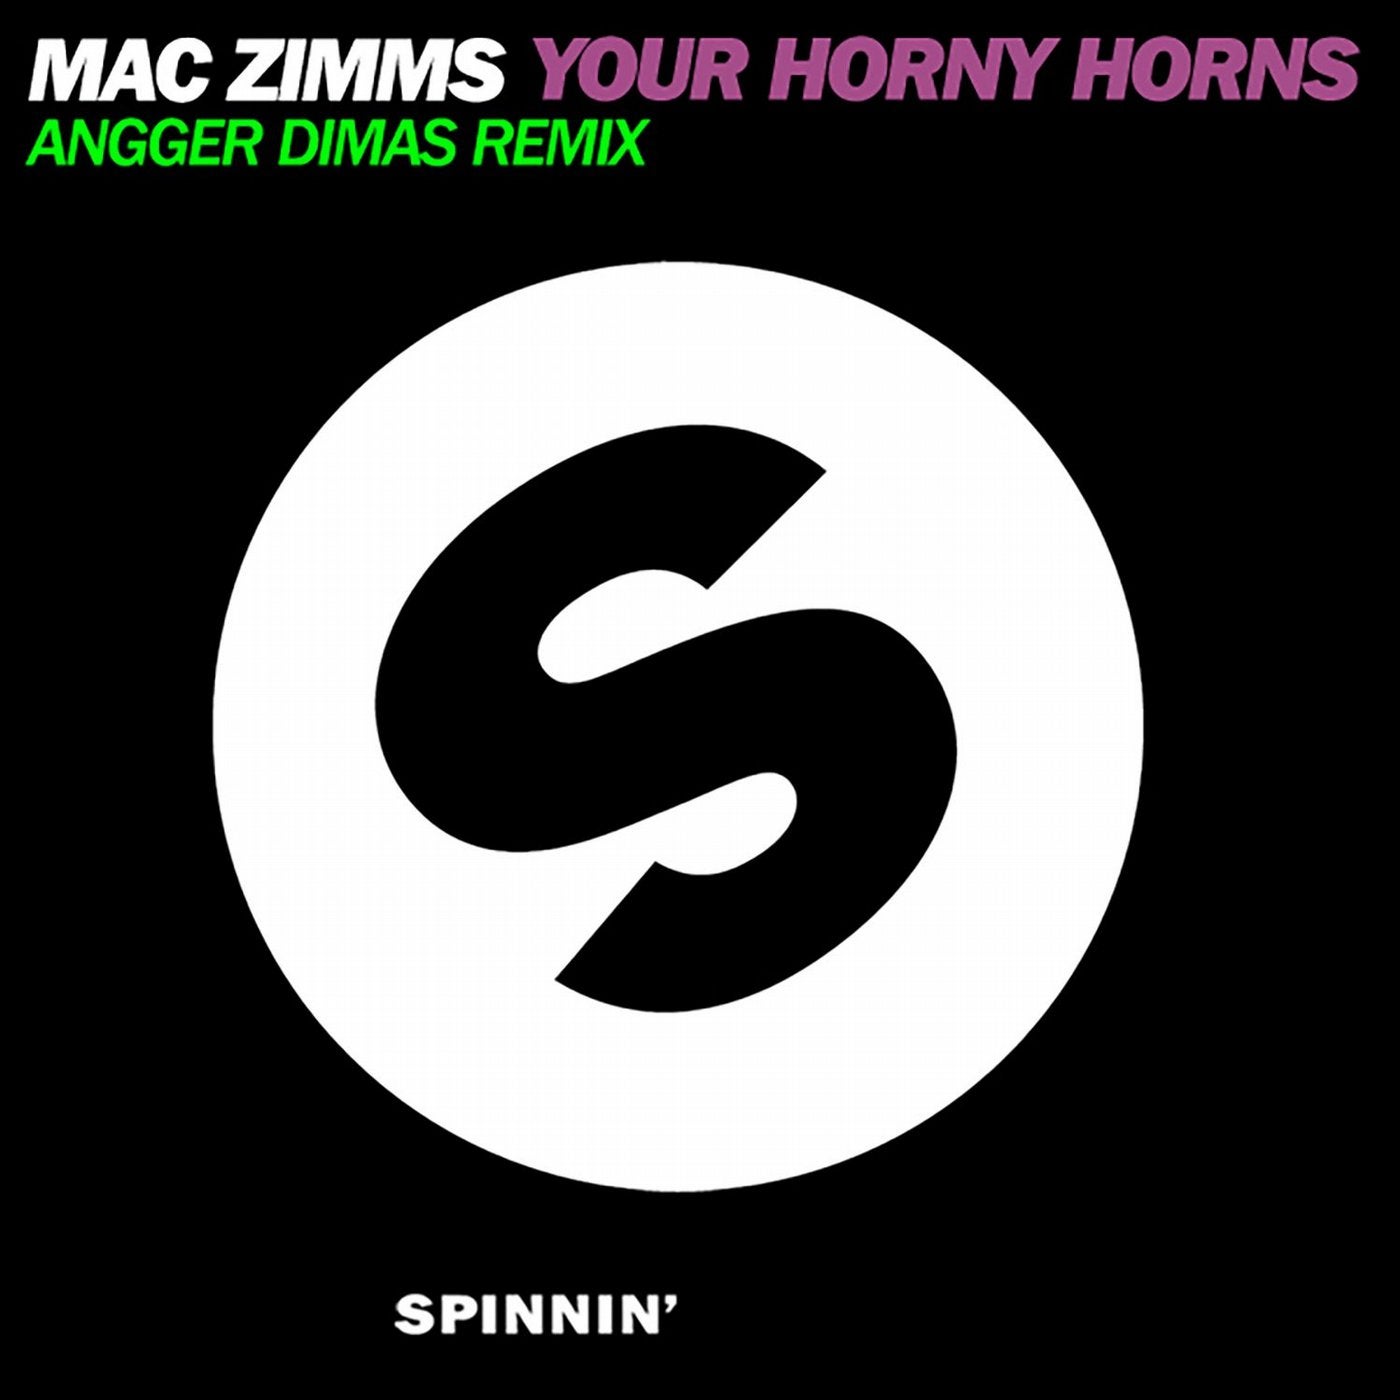 Your Horny Horns